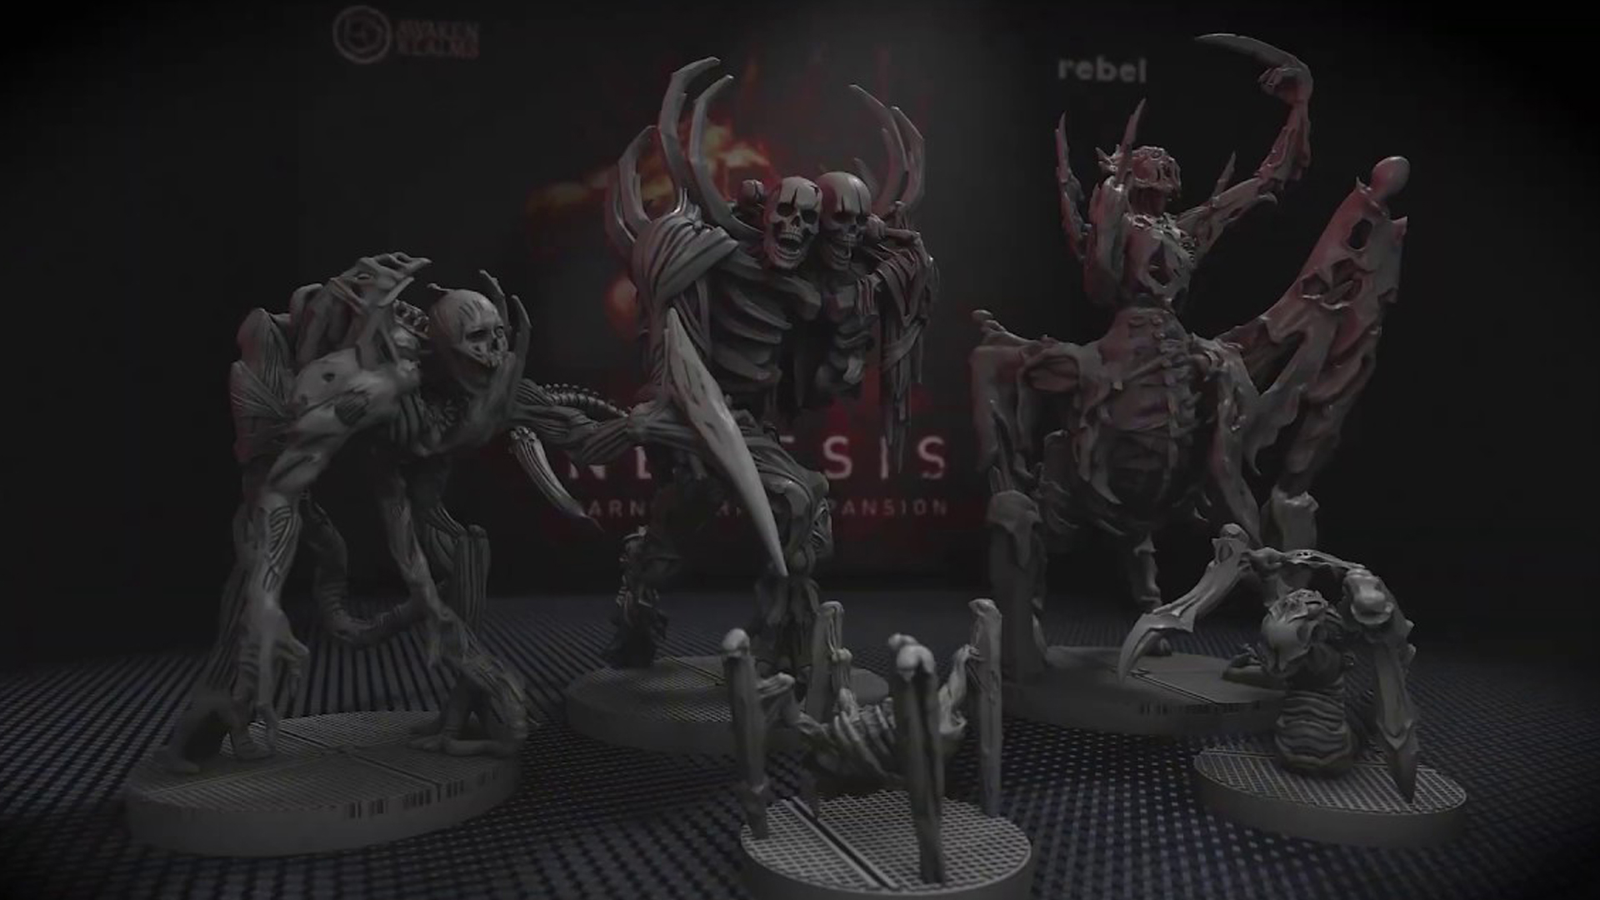 Nemesis: Retaliation board game follows in the footsteps of 1986's Aliens